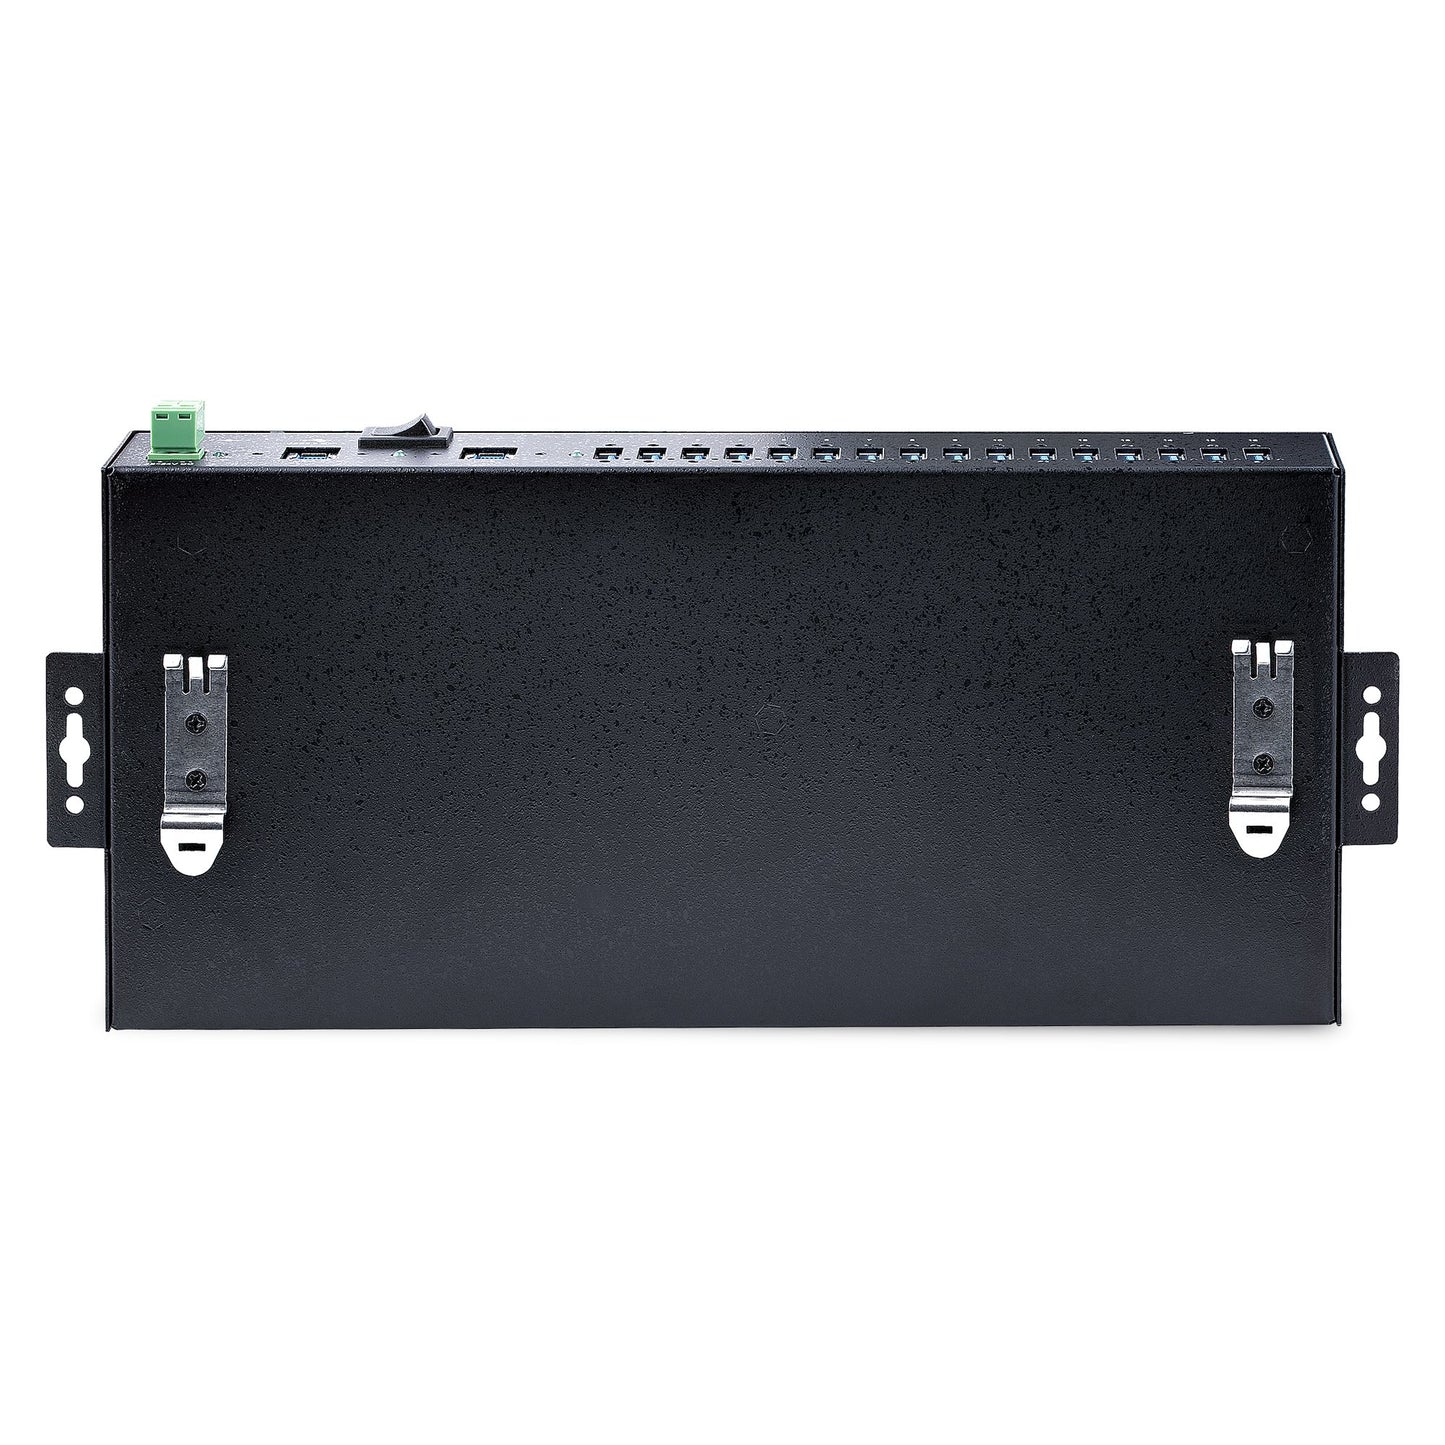 StarTech.com 16-Port Industrial USB 3.0 Hub 5Gbps, Metal, DIN/Surface/Rack Mountable, ESD Protection, Terminal Block Power, up to 120W Shared USB Charging, Dual-Host Hub/Switch-5